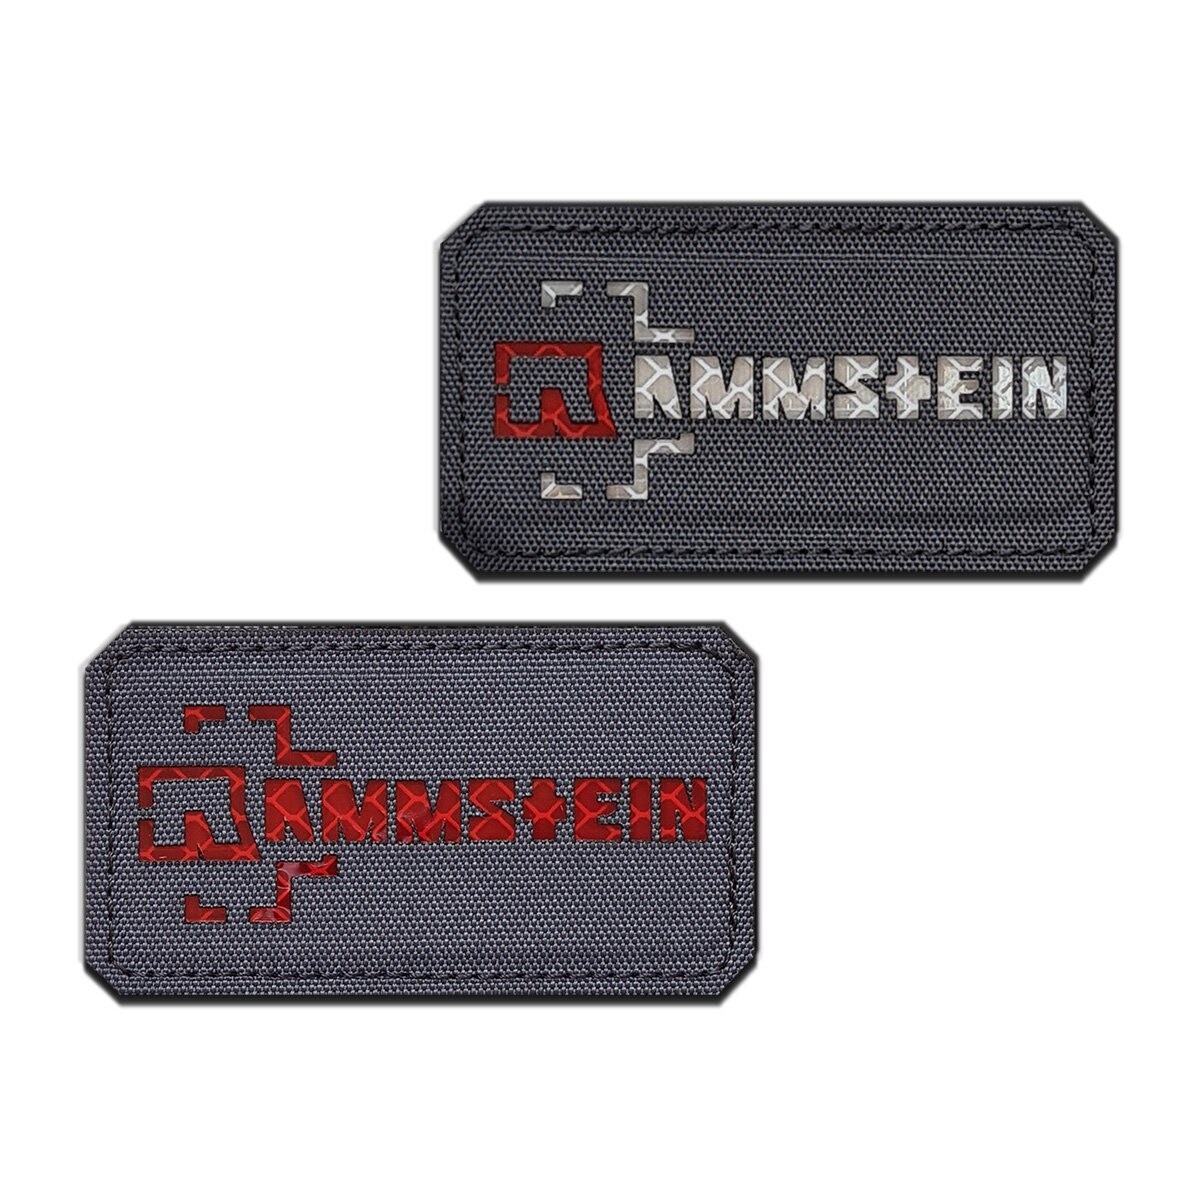 Rammstein Small Patch Badge Embroidered Iron on Applique Souvenir Accessory  : : Arts & Crafts